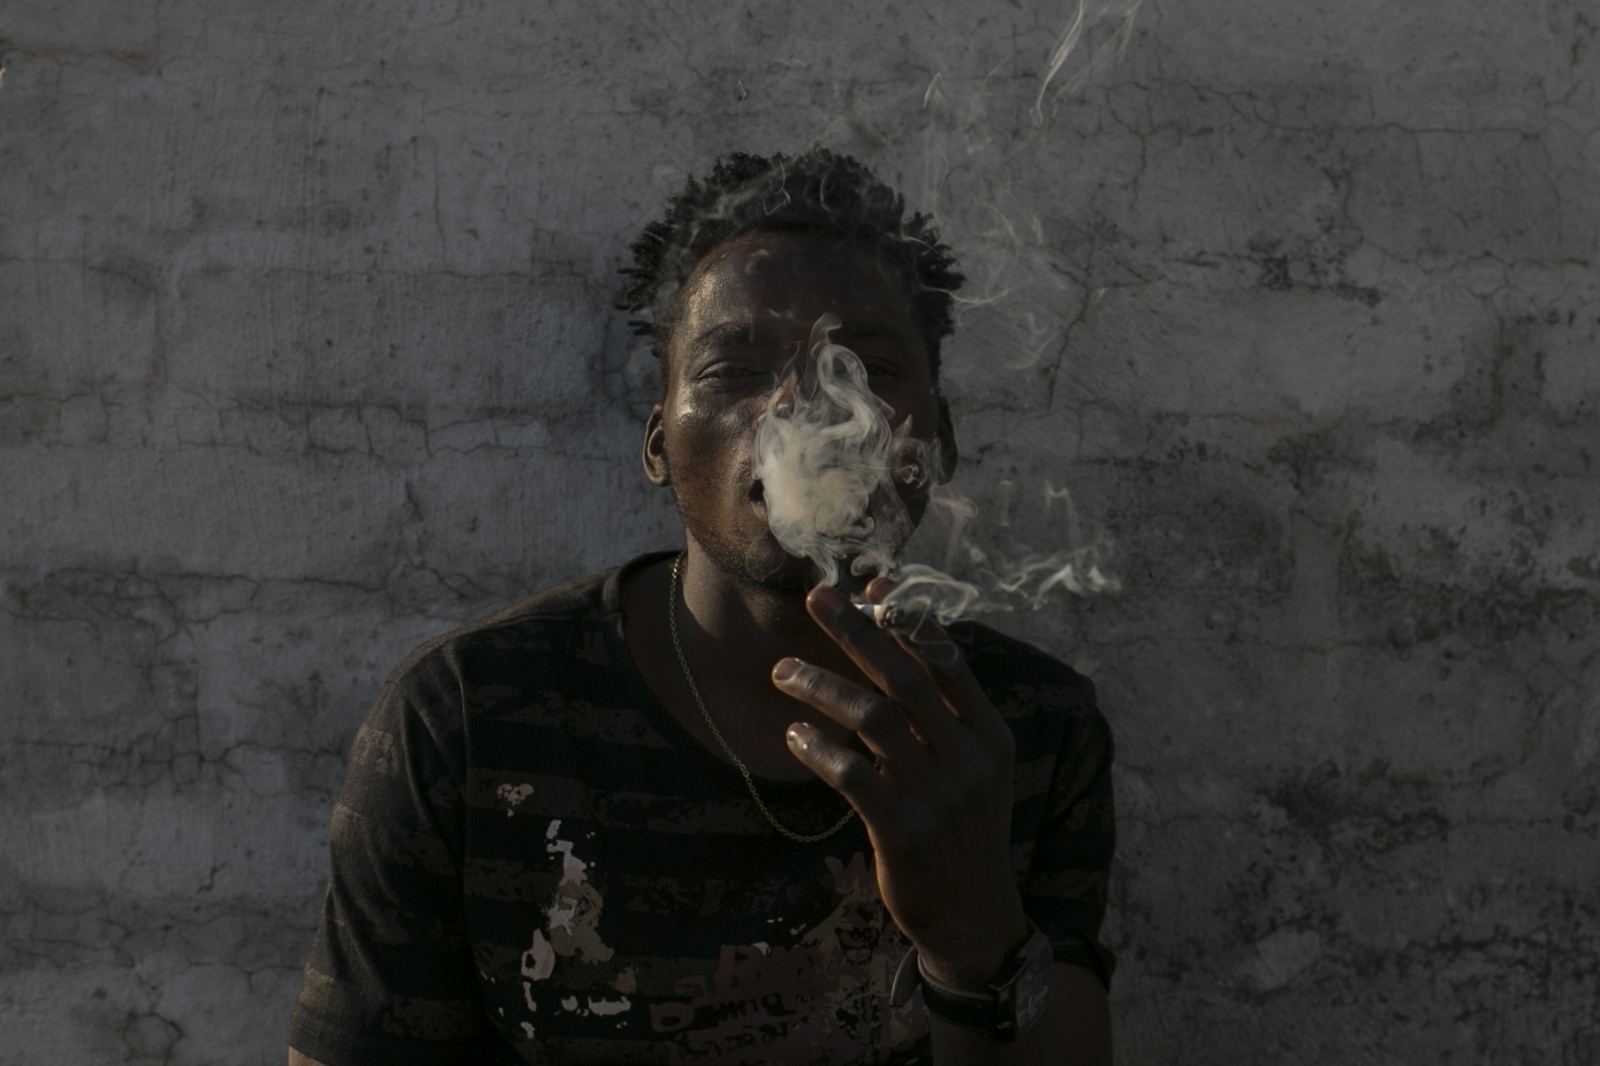 Malawian migrant Jonas smokes m...doned building. March 29, 2018.